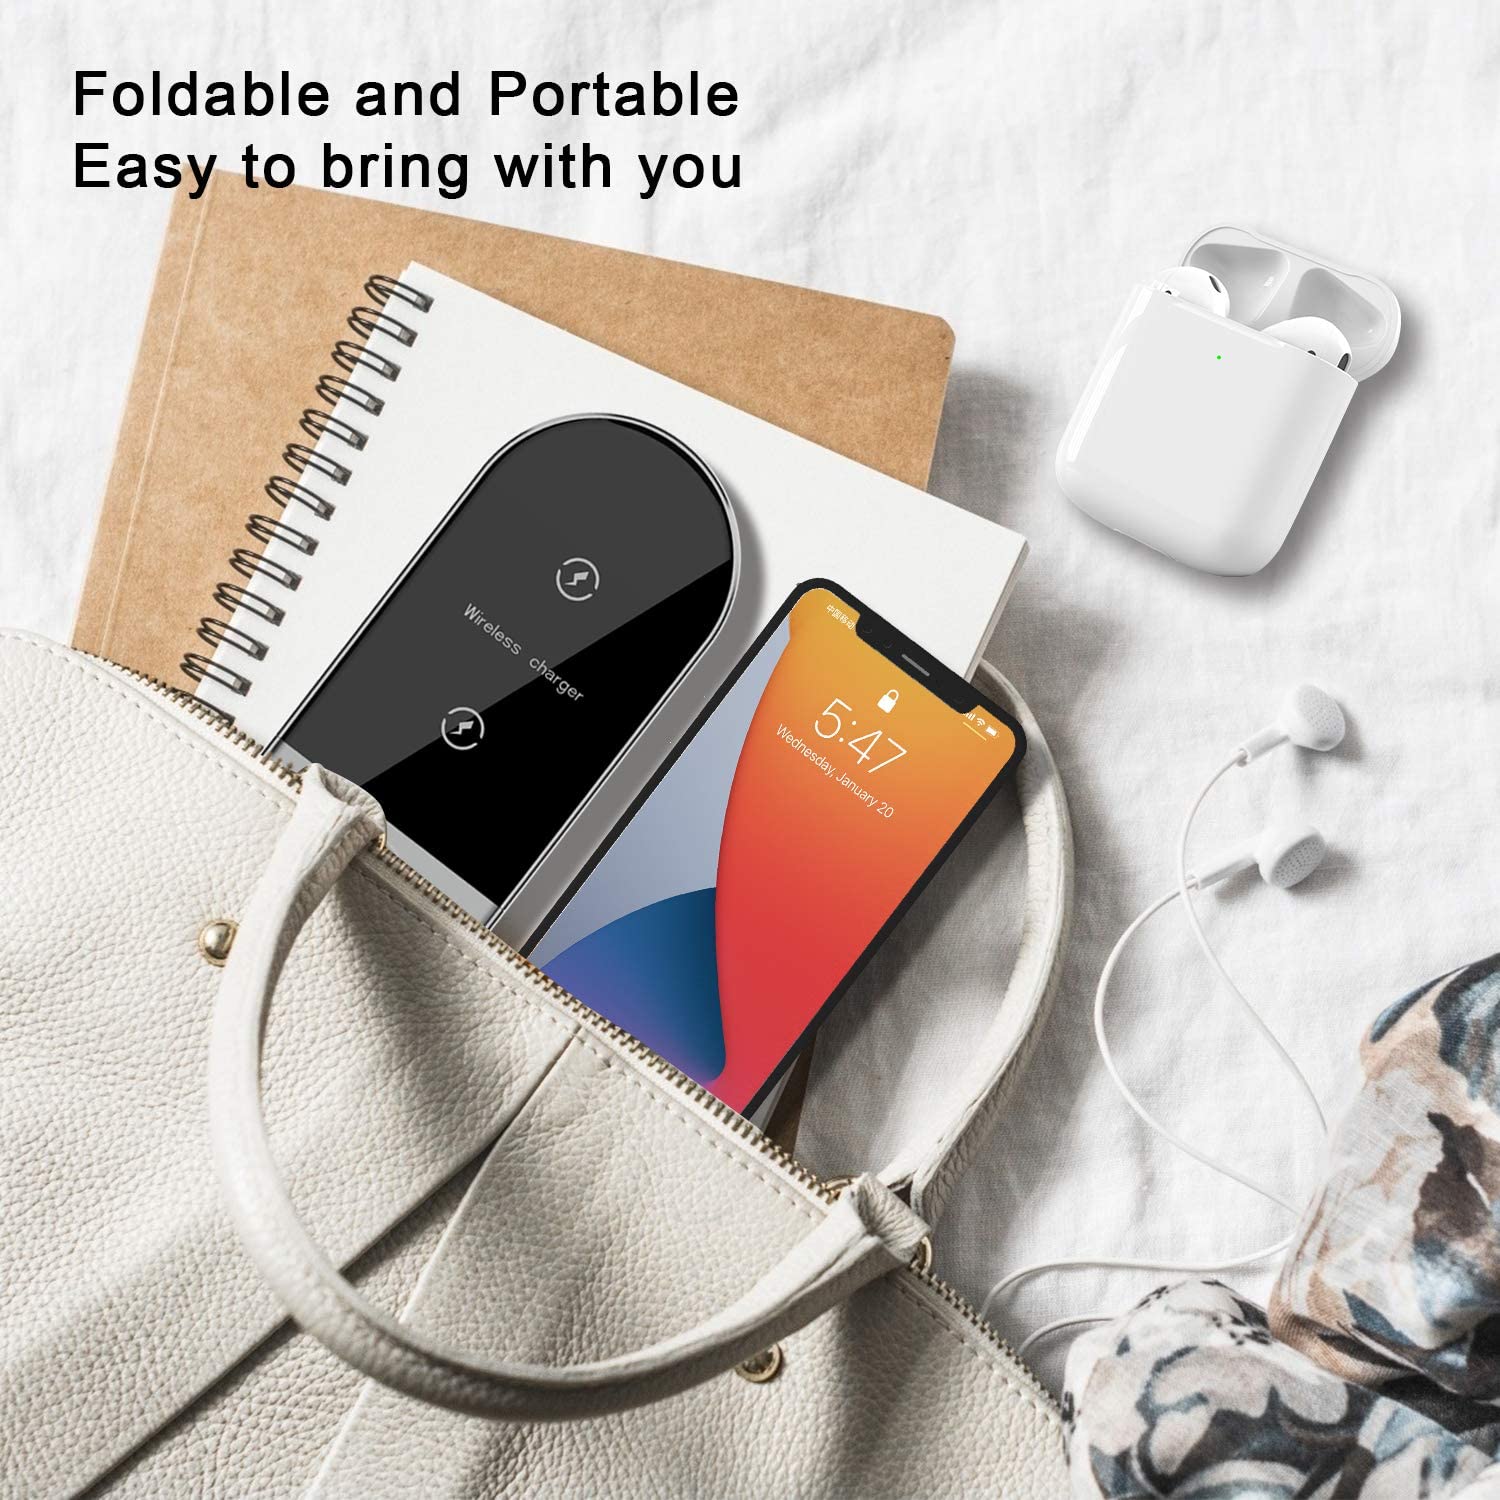 15W 3 in 1 Wireless Charger Station | Shopna Online Store .